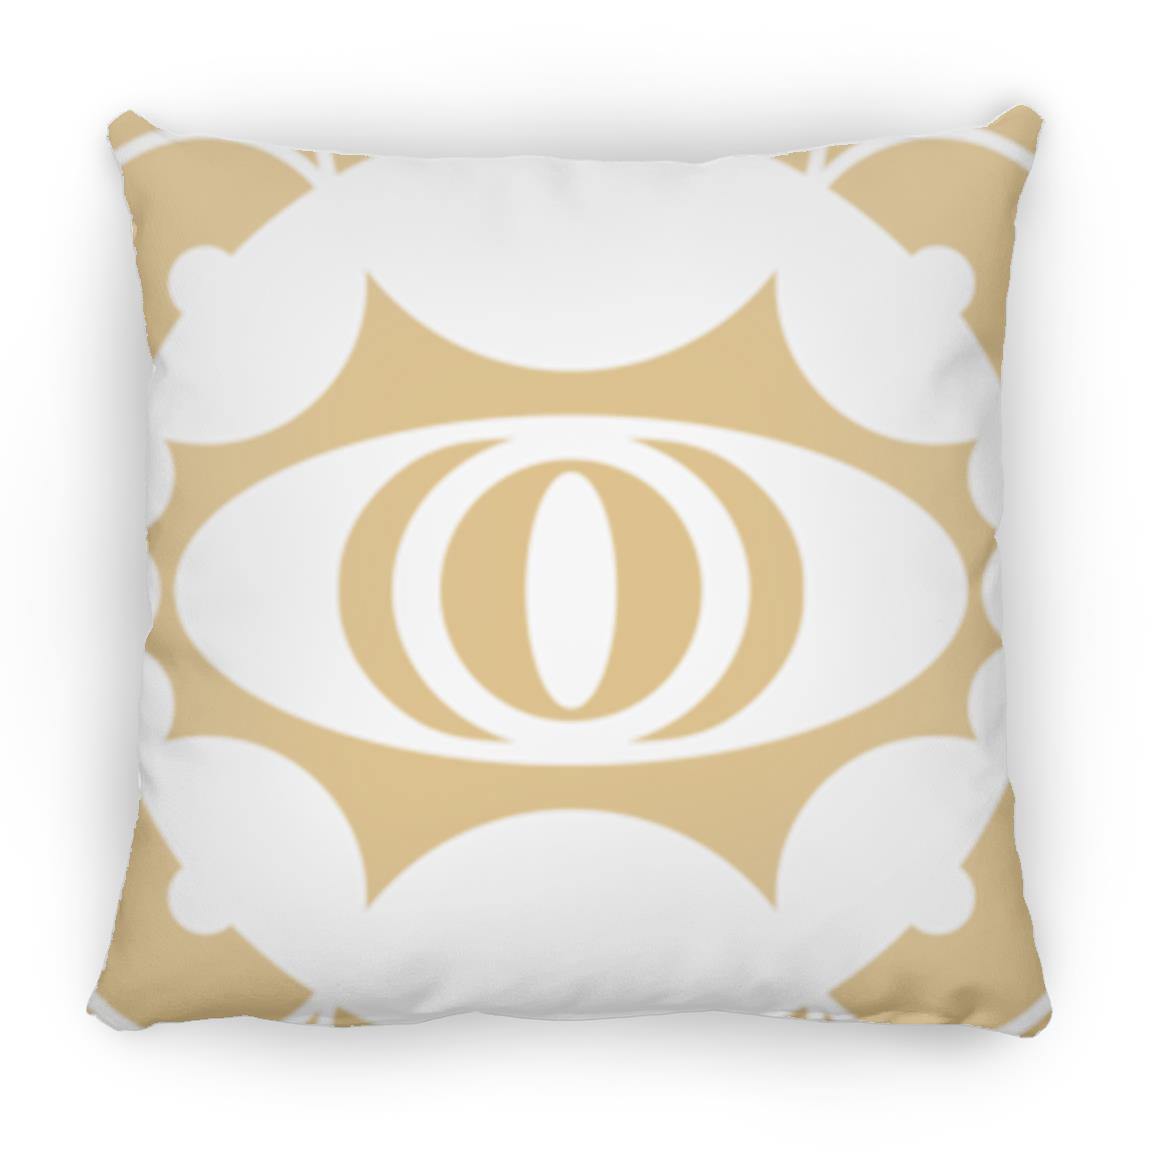 Crop Circle Pillow - Petersfield - Shapes of Wisdom